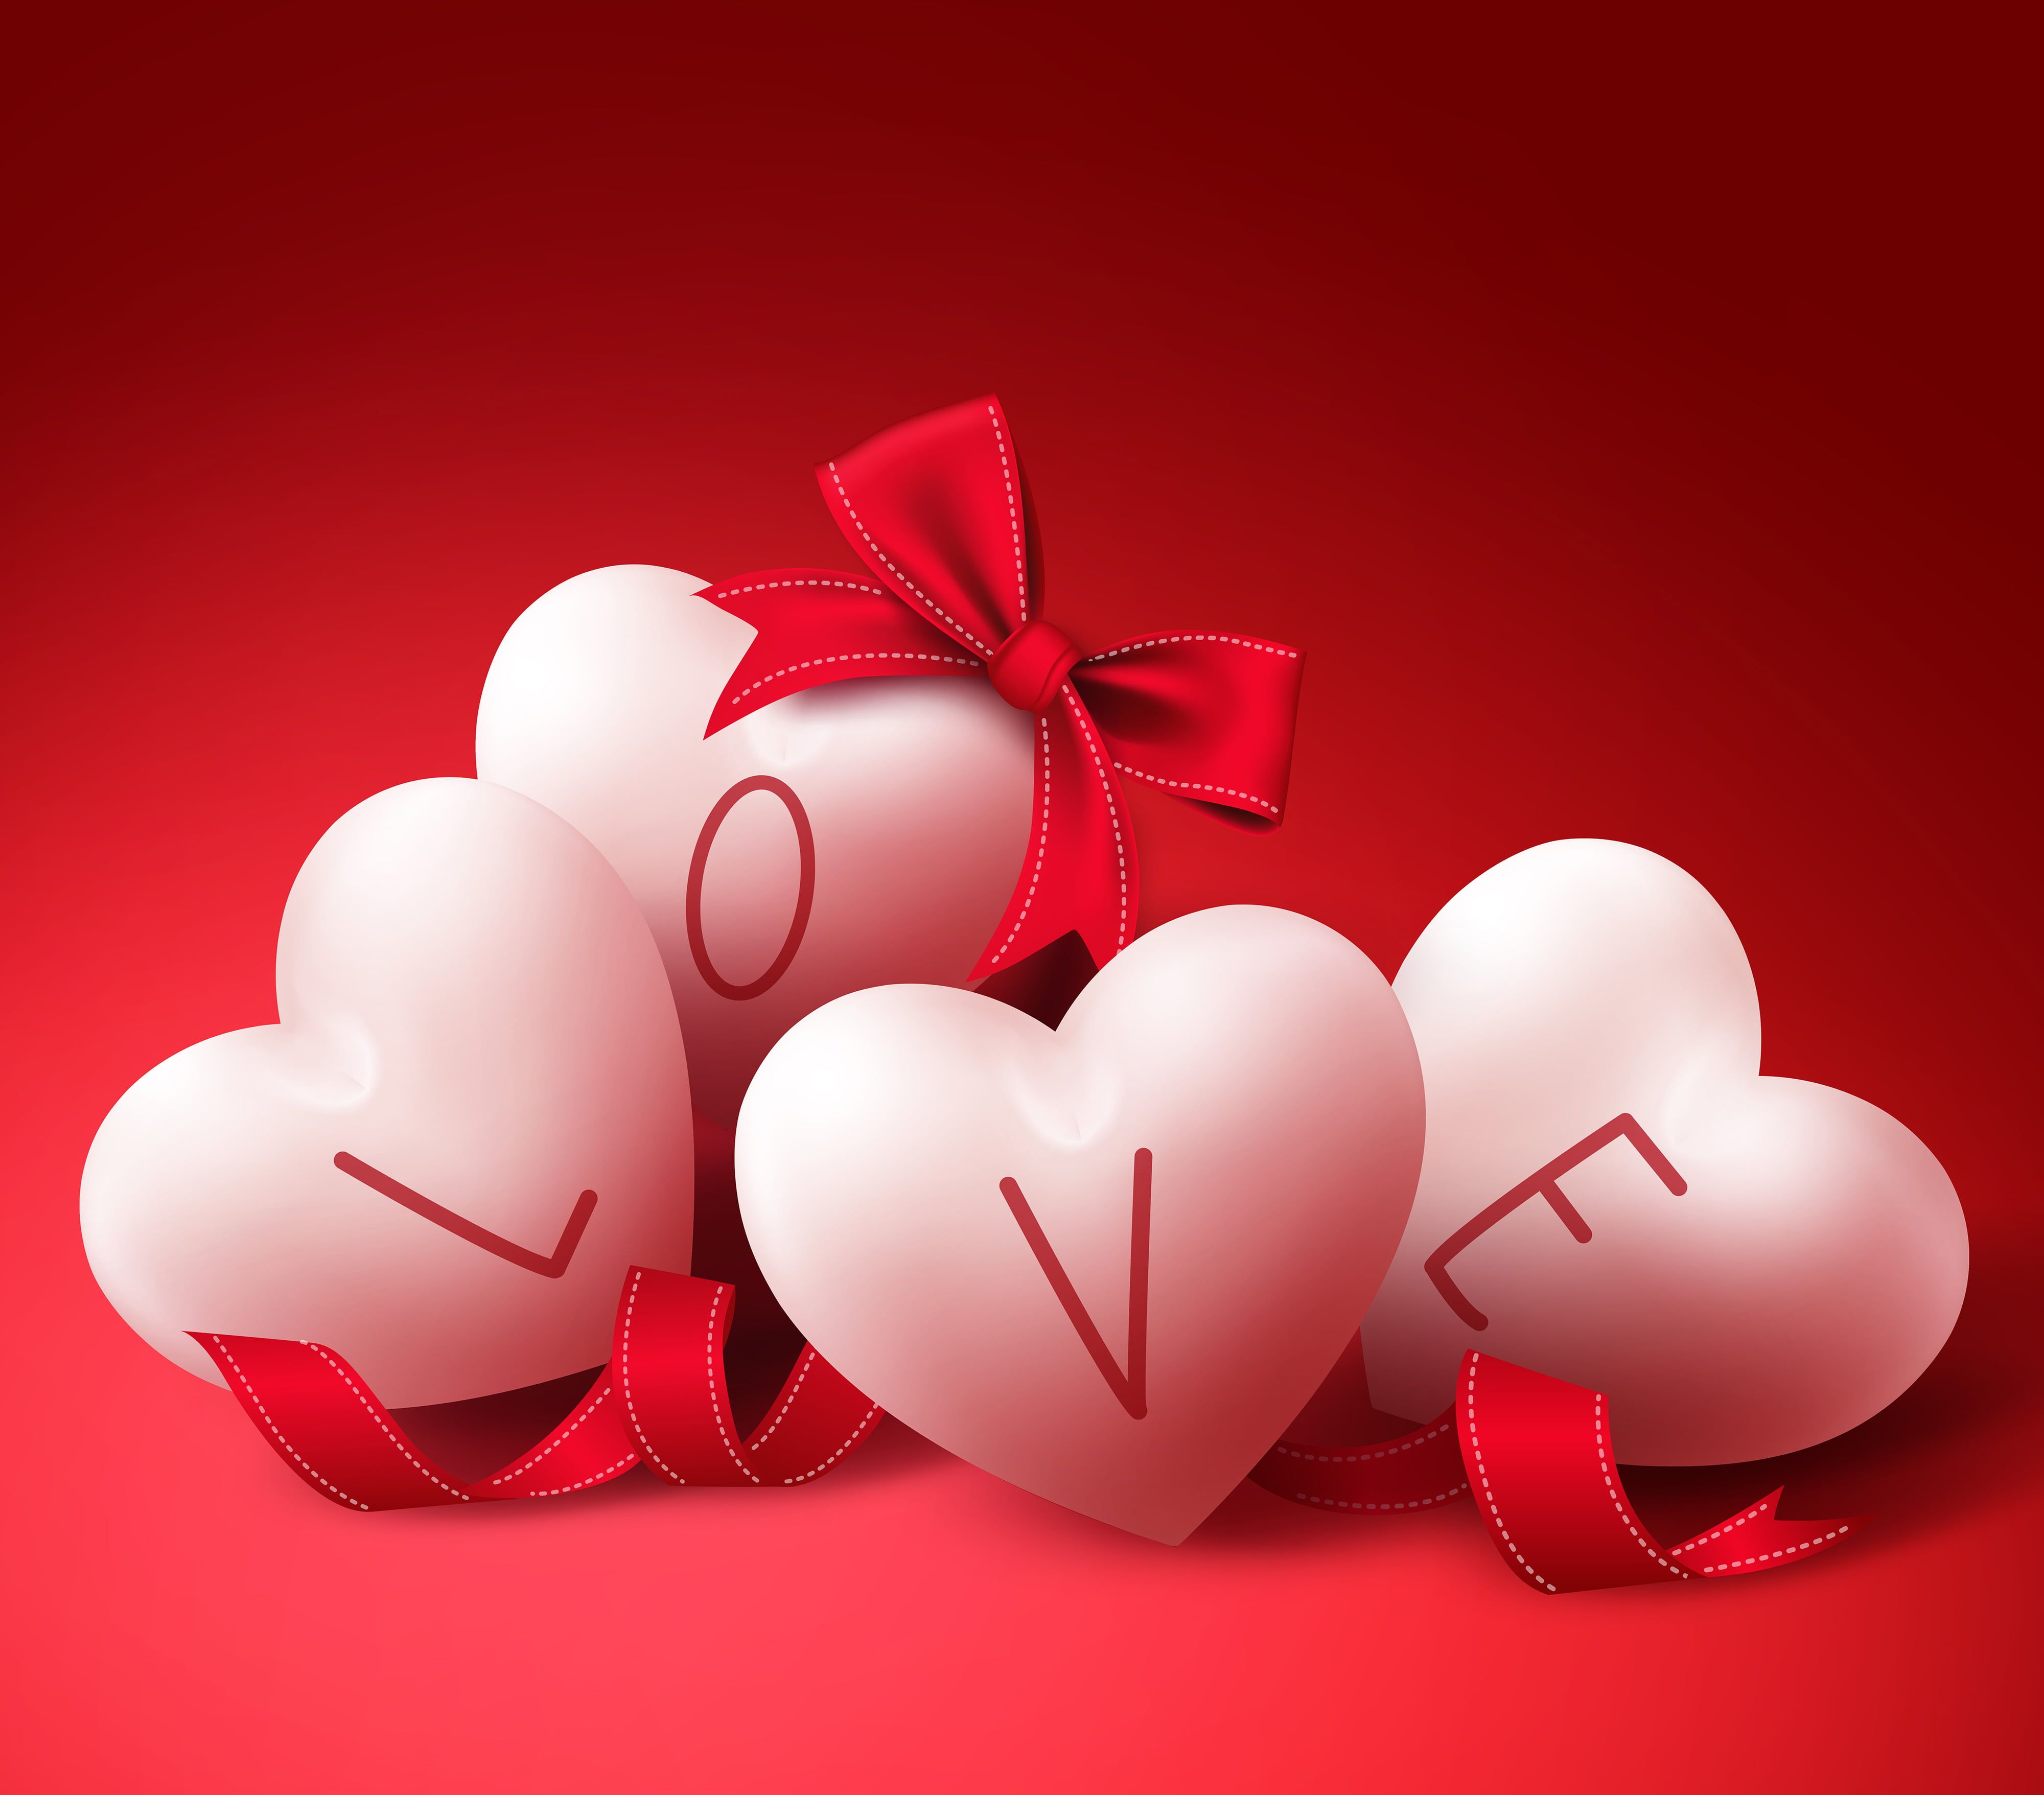 White And Red Heart Shaped Love 3D Illustration HD Wallpaper